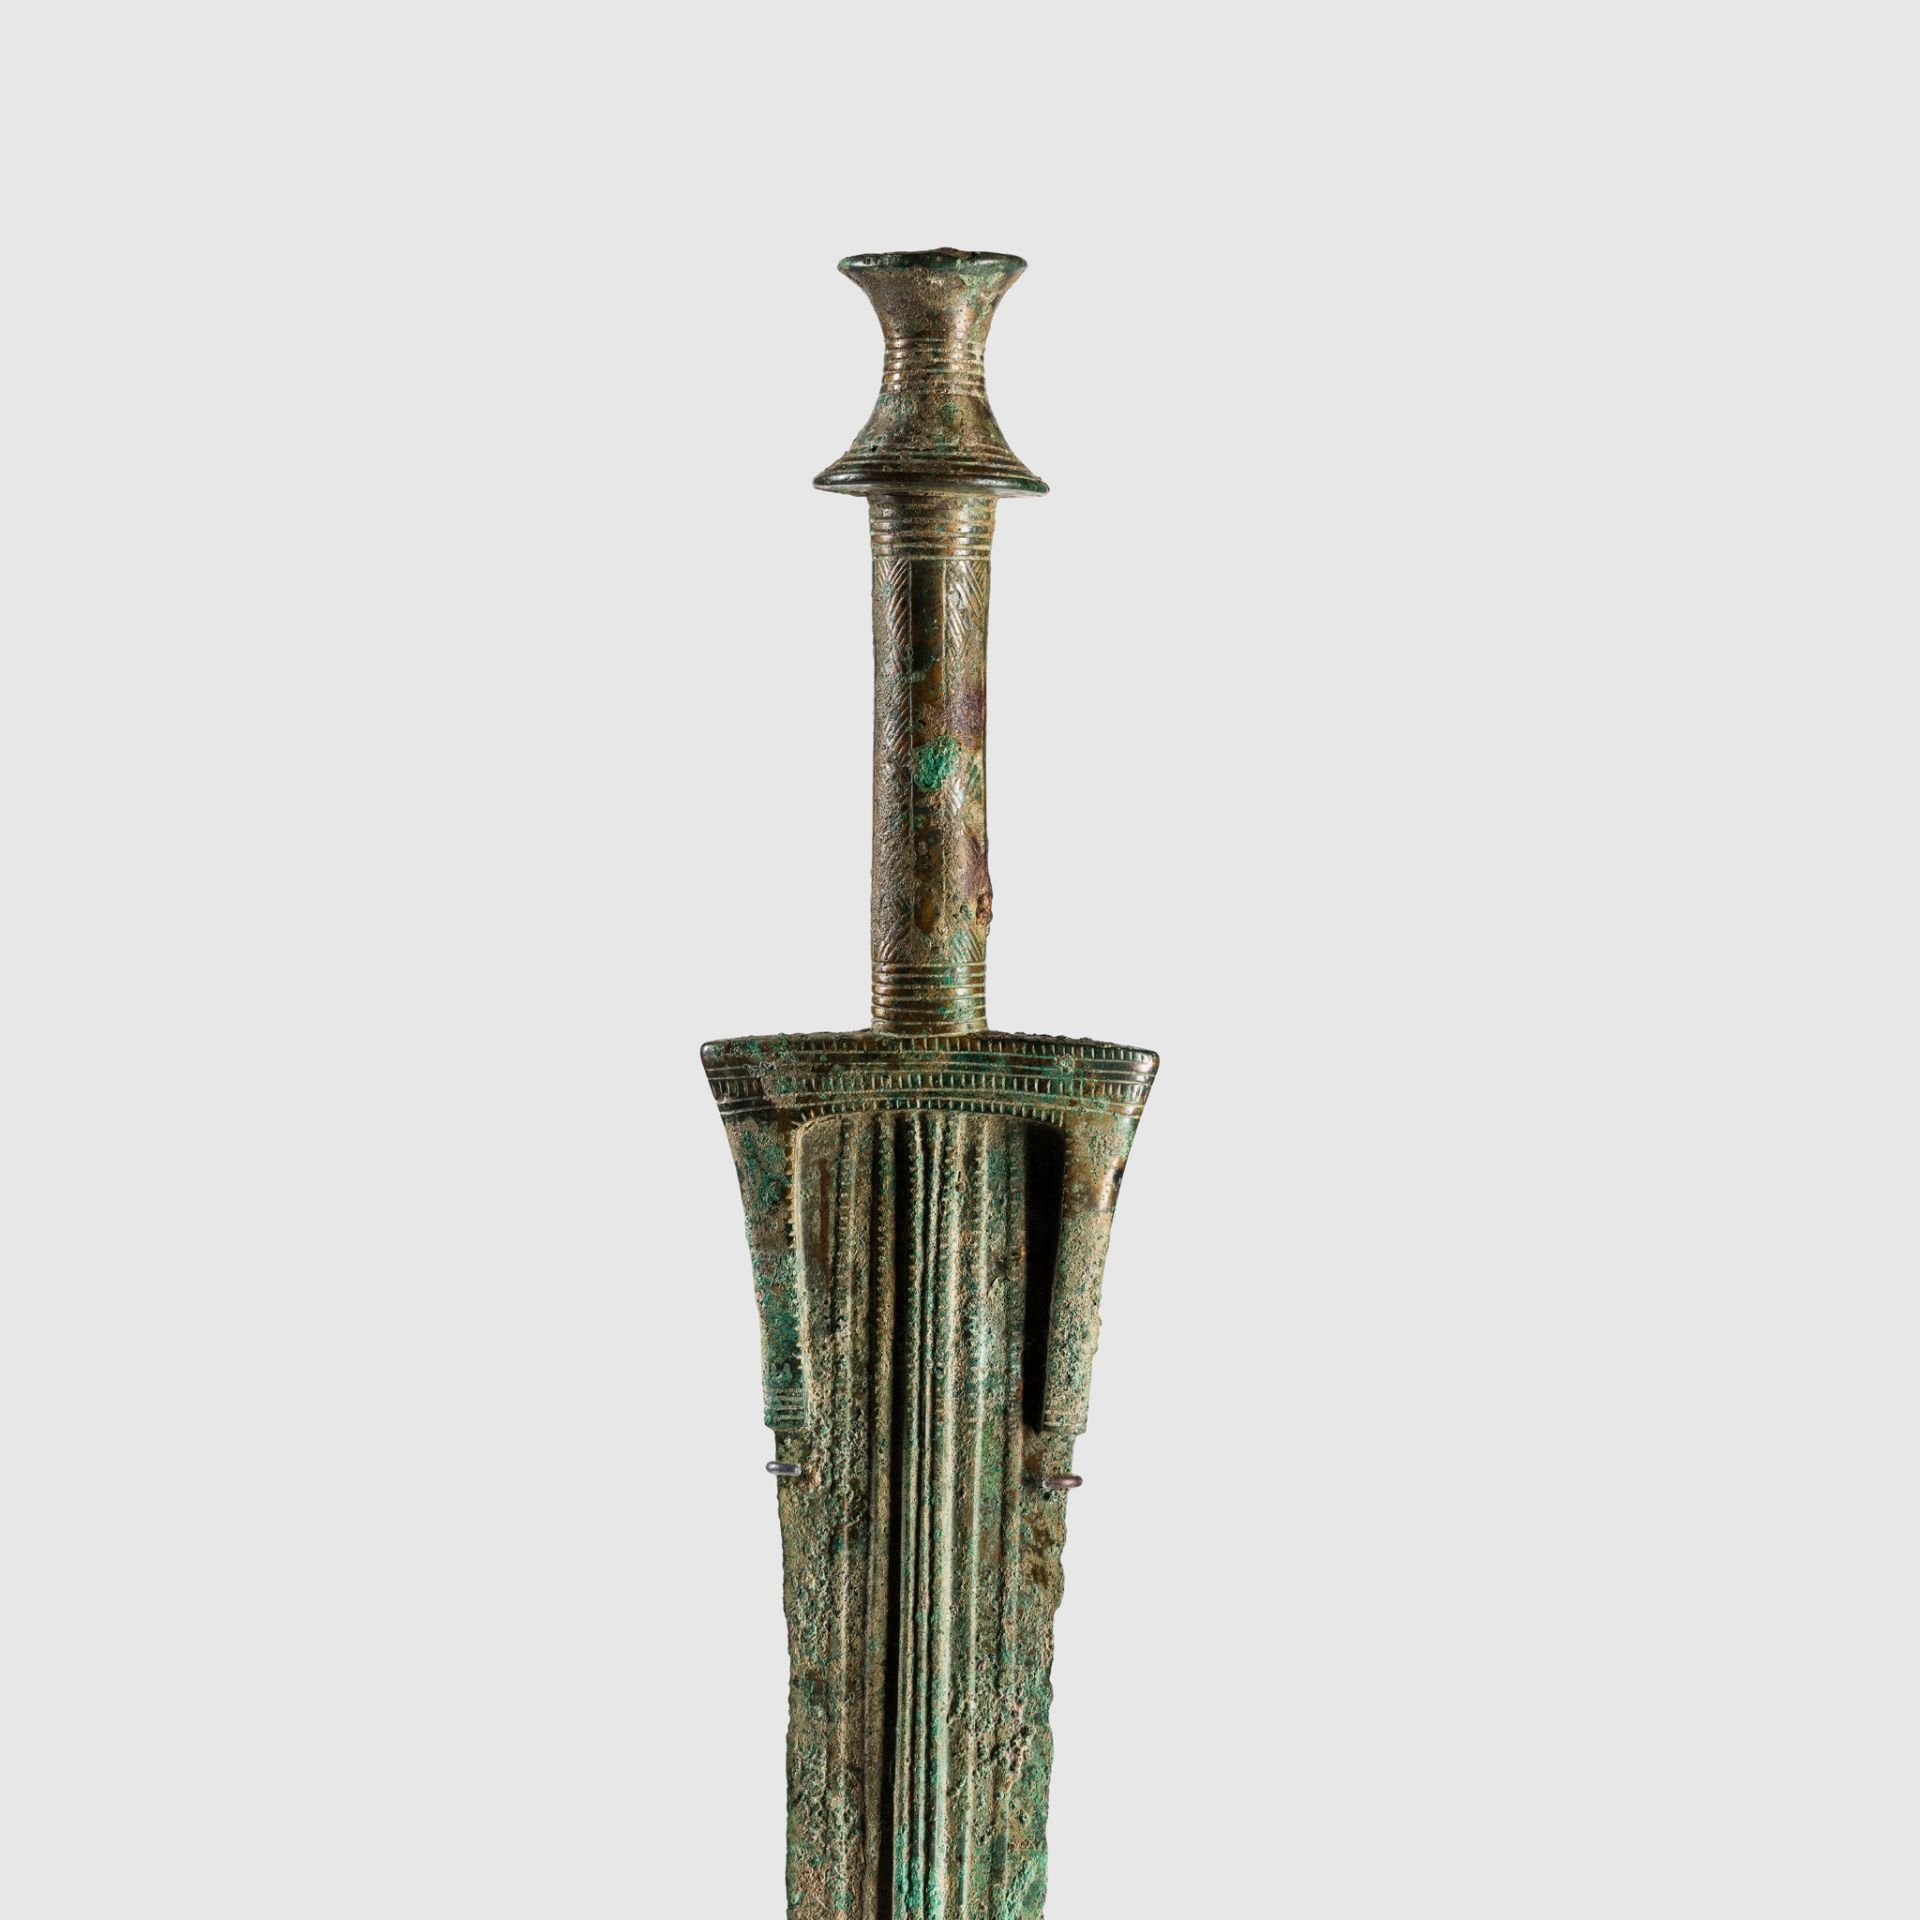 TRIO OF NEAR EASTERN SWORDS NEAR EAST, EARLY FIRST MILLENIUM B.C. - Image 2 of 4